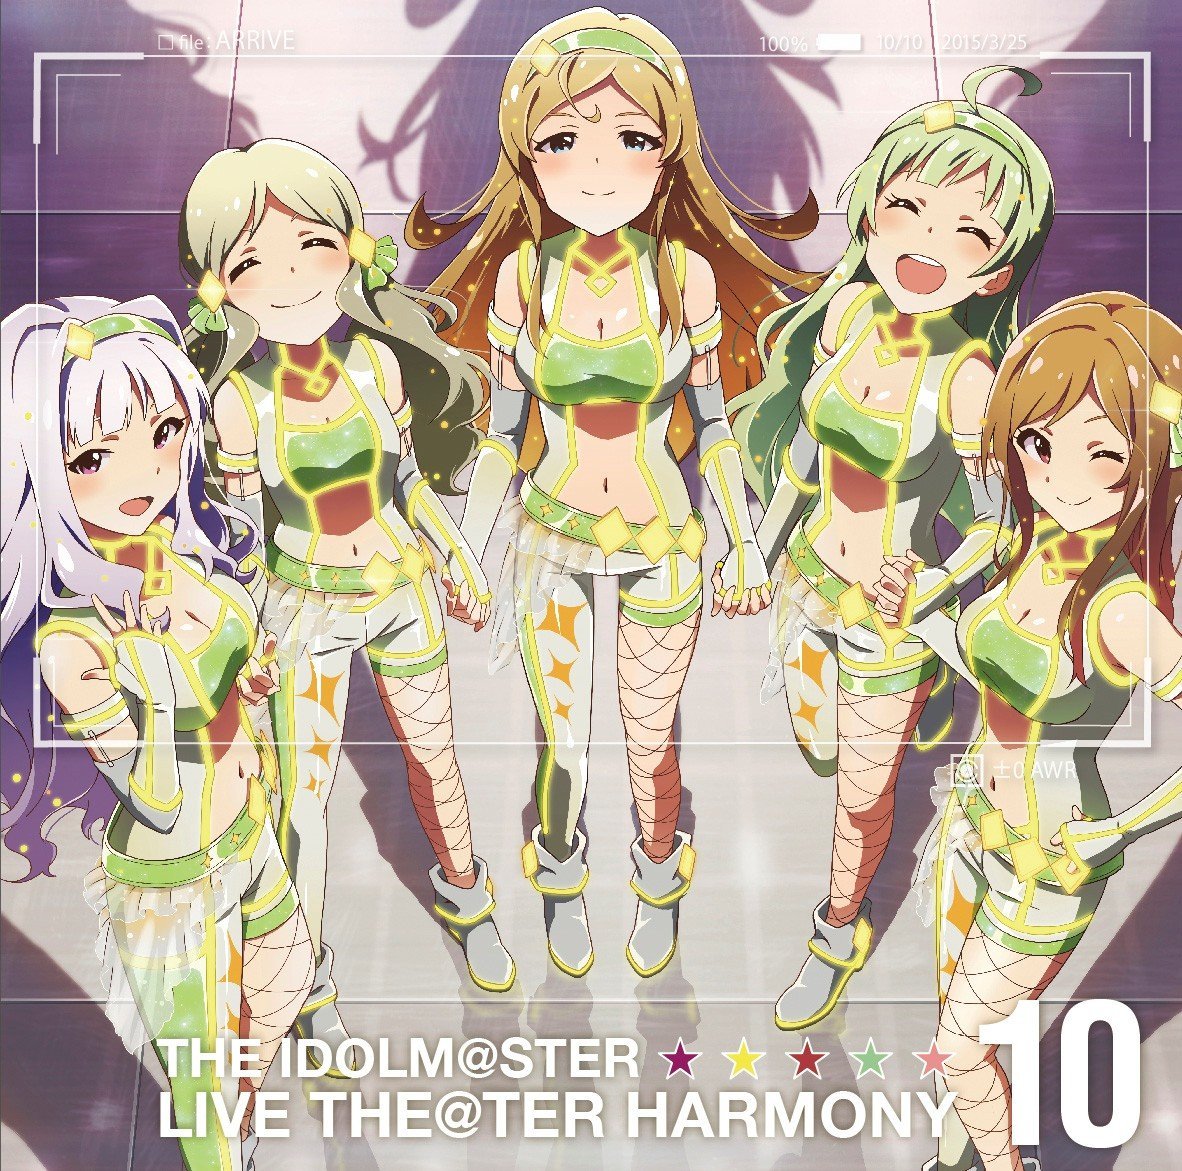 THE IDOLM@STER LIVE THE@TER HARMONY 10 | THE iDOLM@STER: Million 